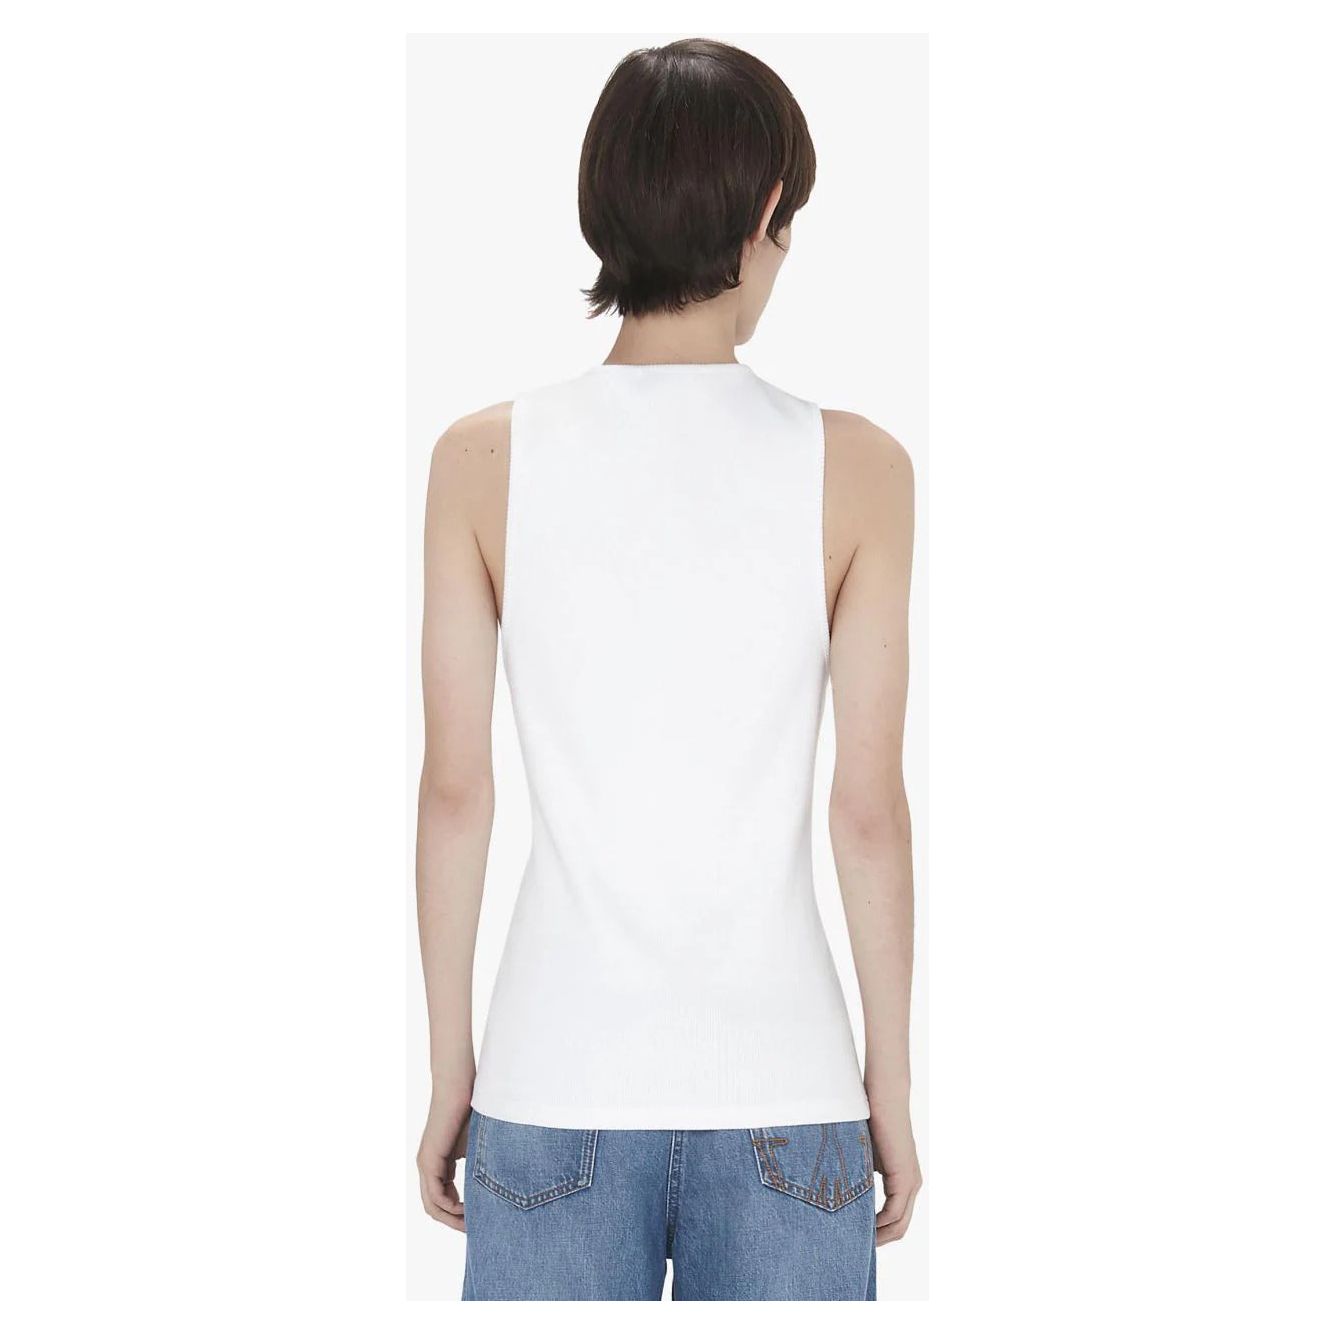 JW ANDERSON TANK TOP WITH ANCHOR LOGO EMBROIDERY - Yooto